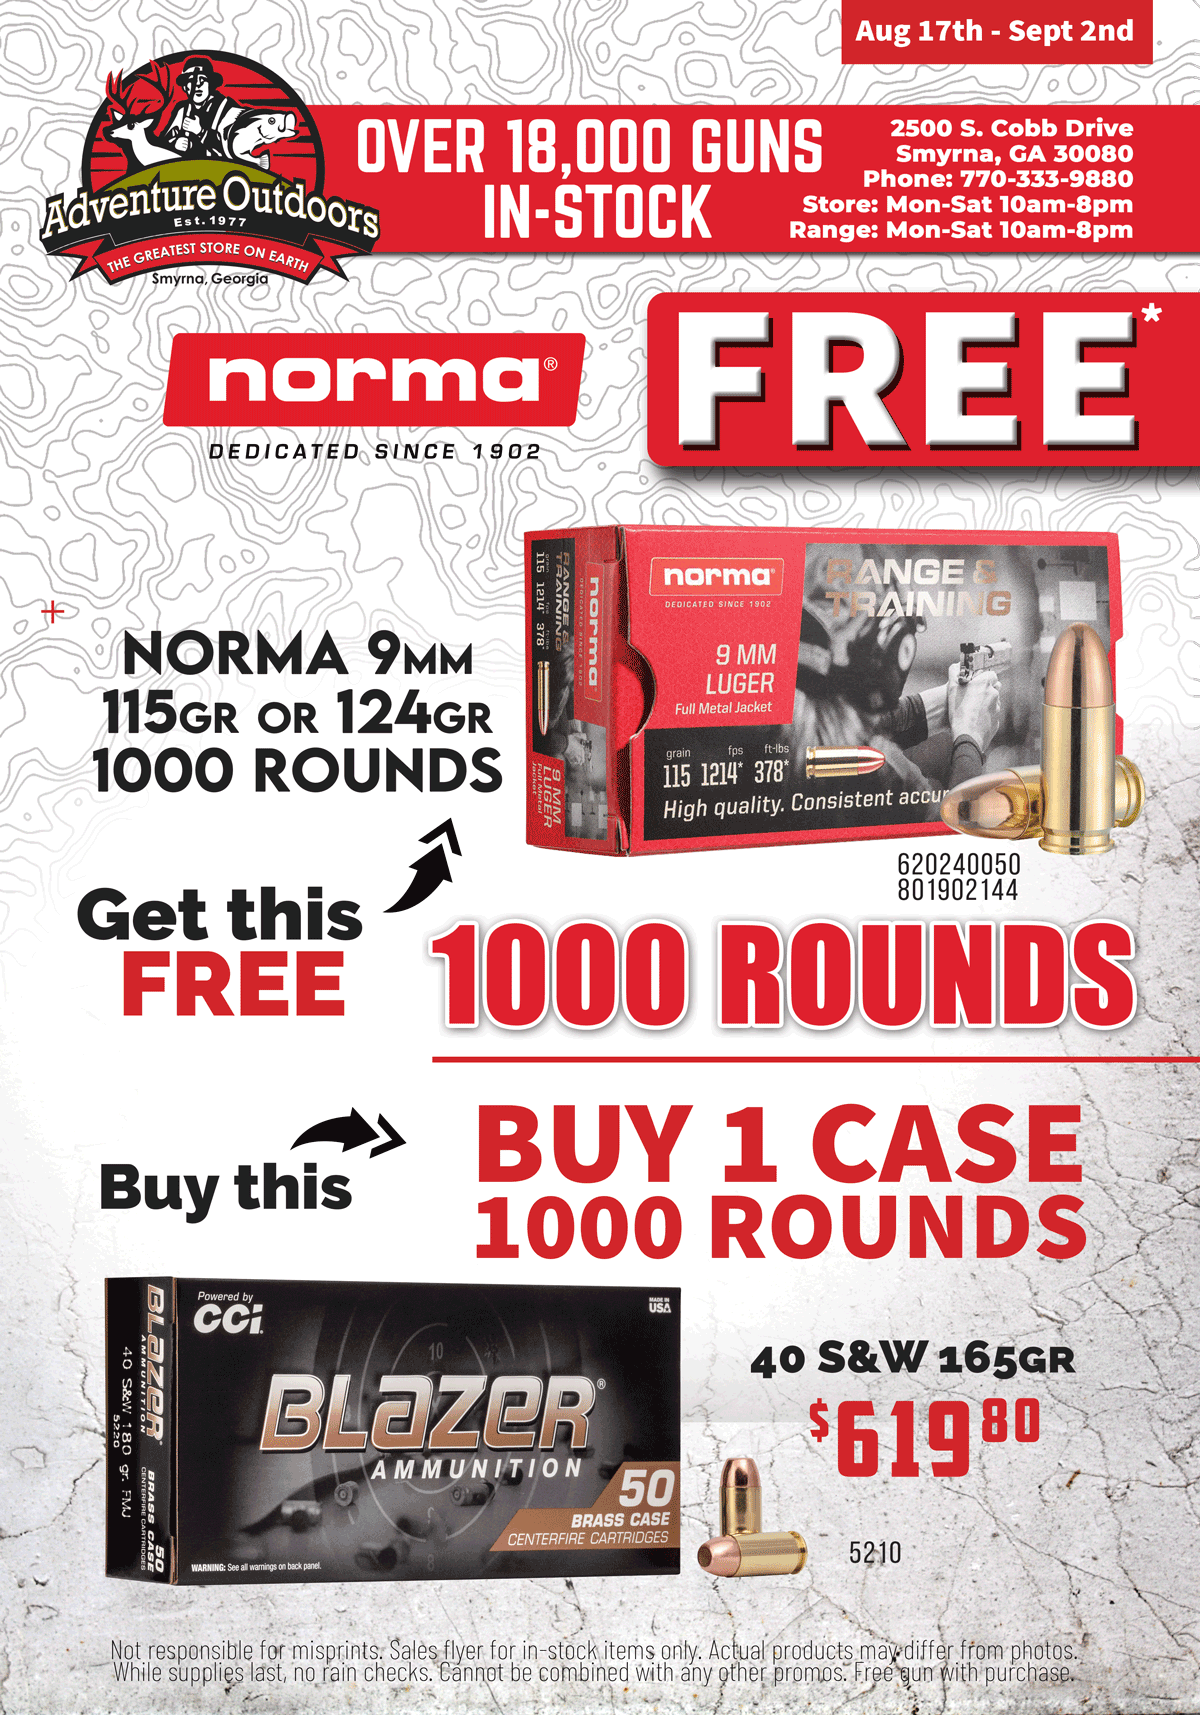 Free 1000 Rounds of Norma 9mm Ammo